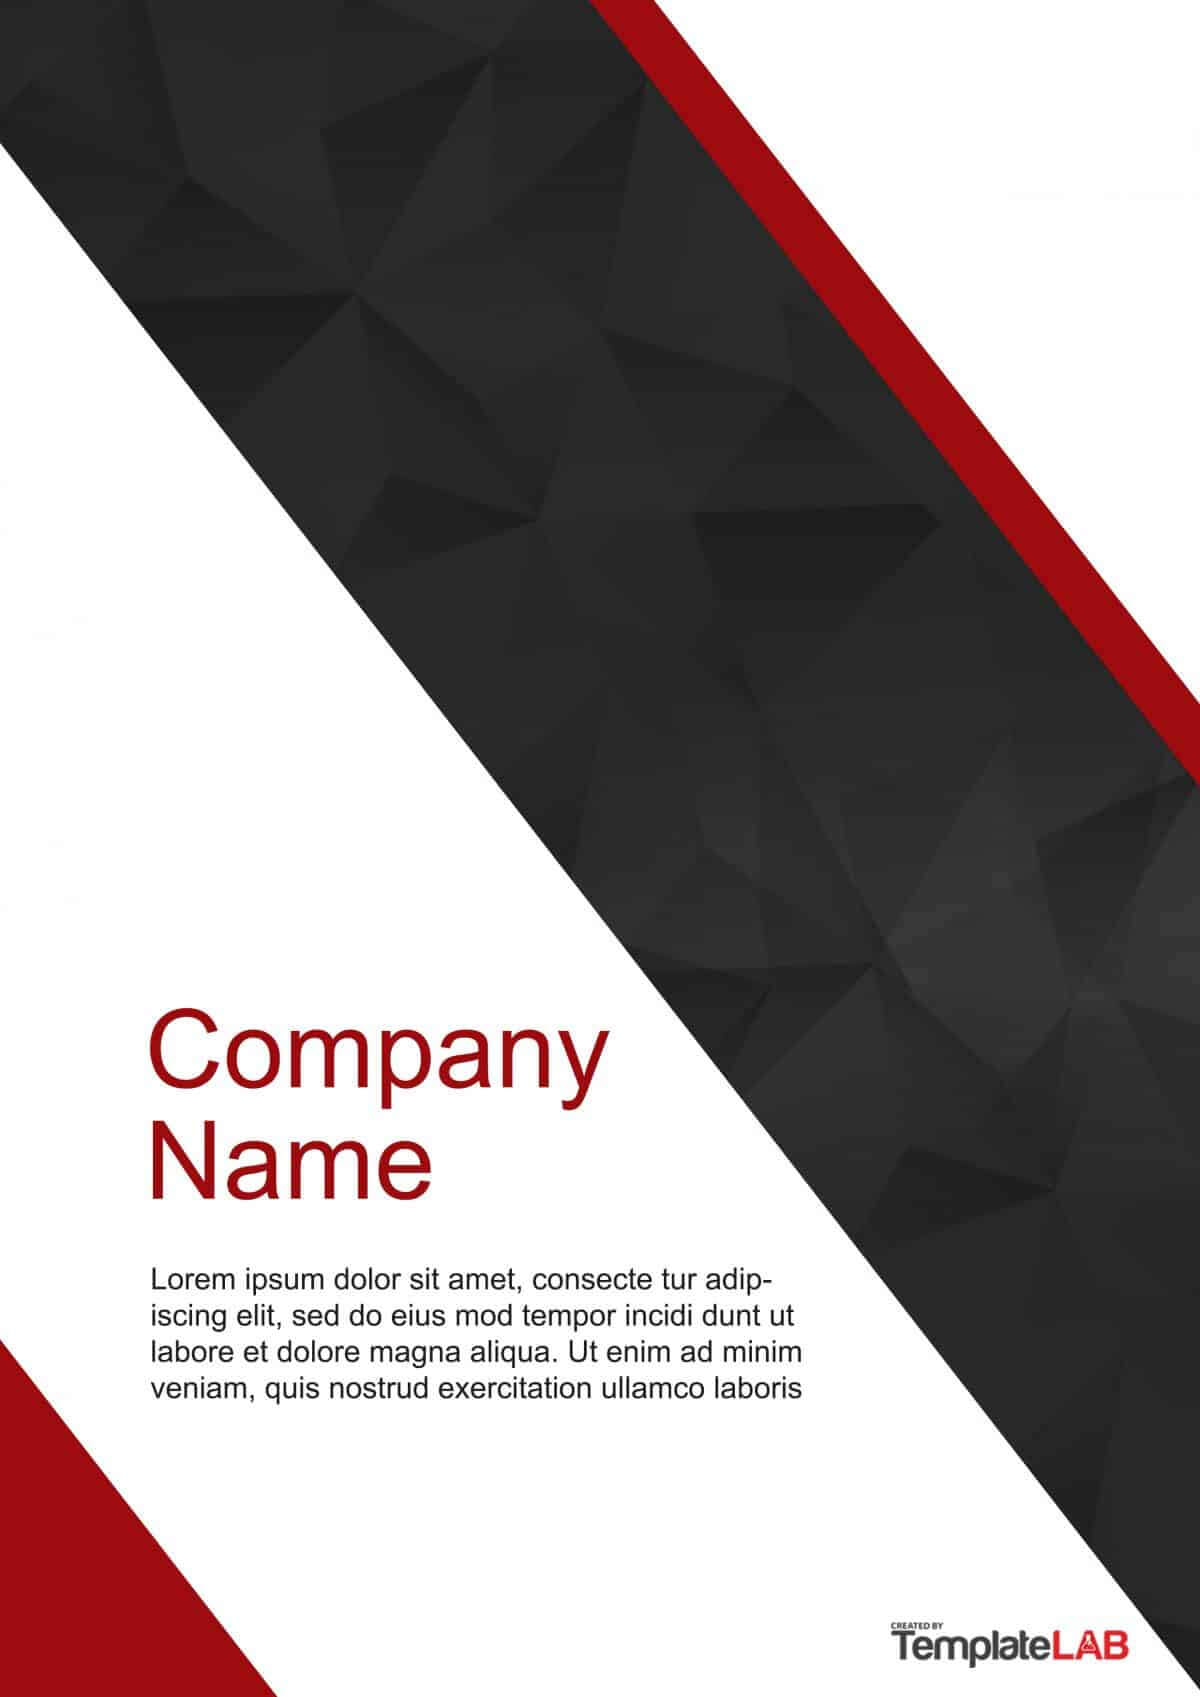 39 Amazing Cover Page Templates (Word + Psd) ᐅ Template Lab For Cover Pages For Word Templates